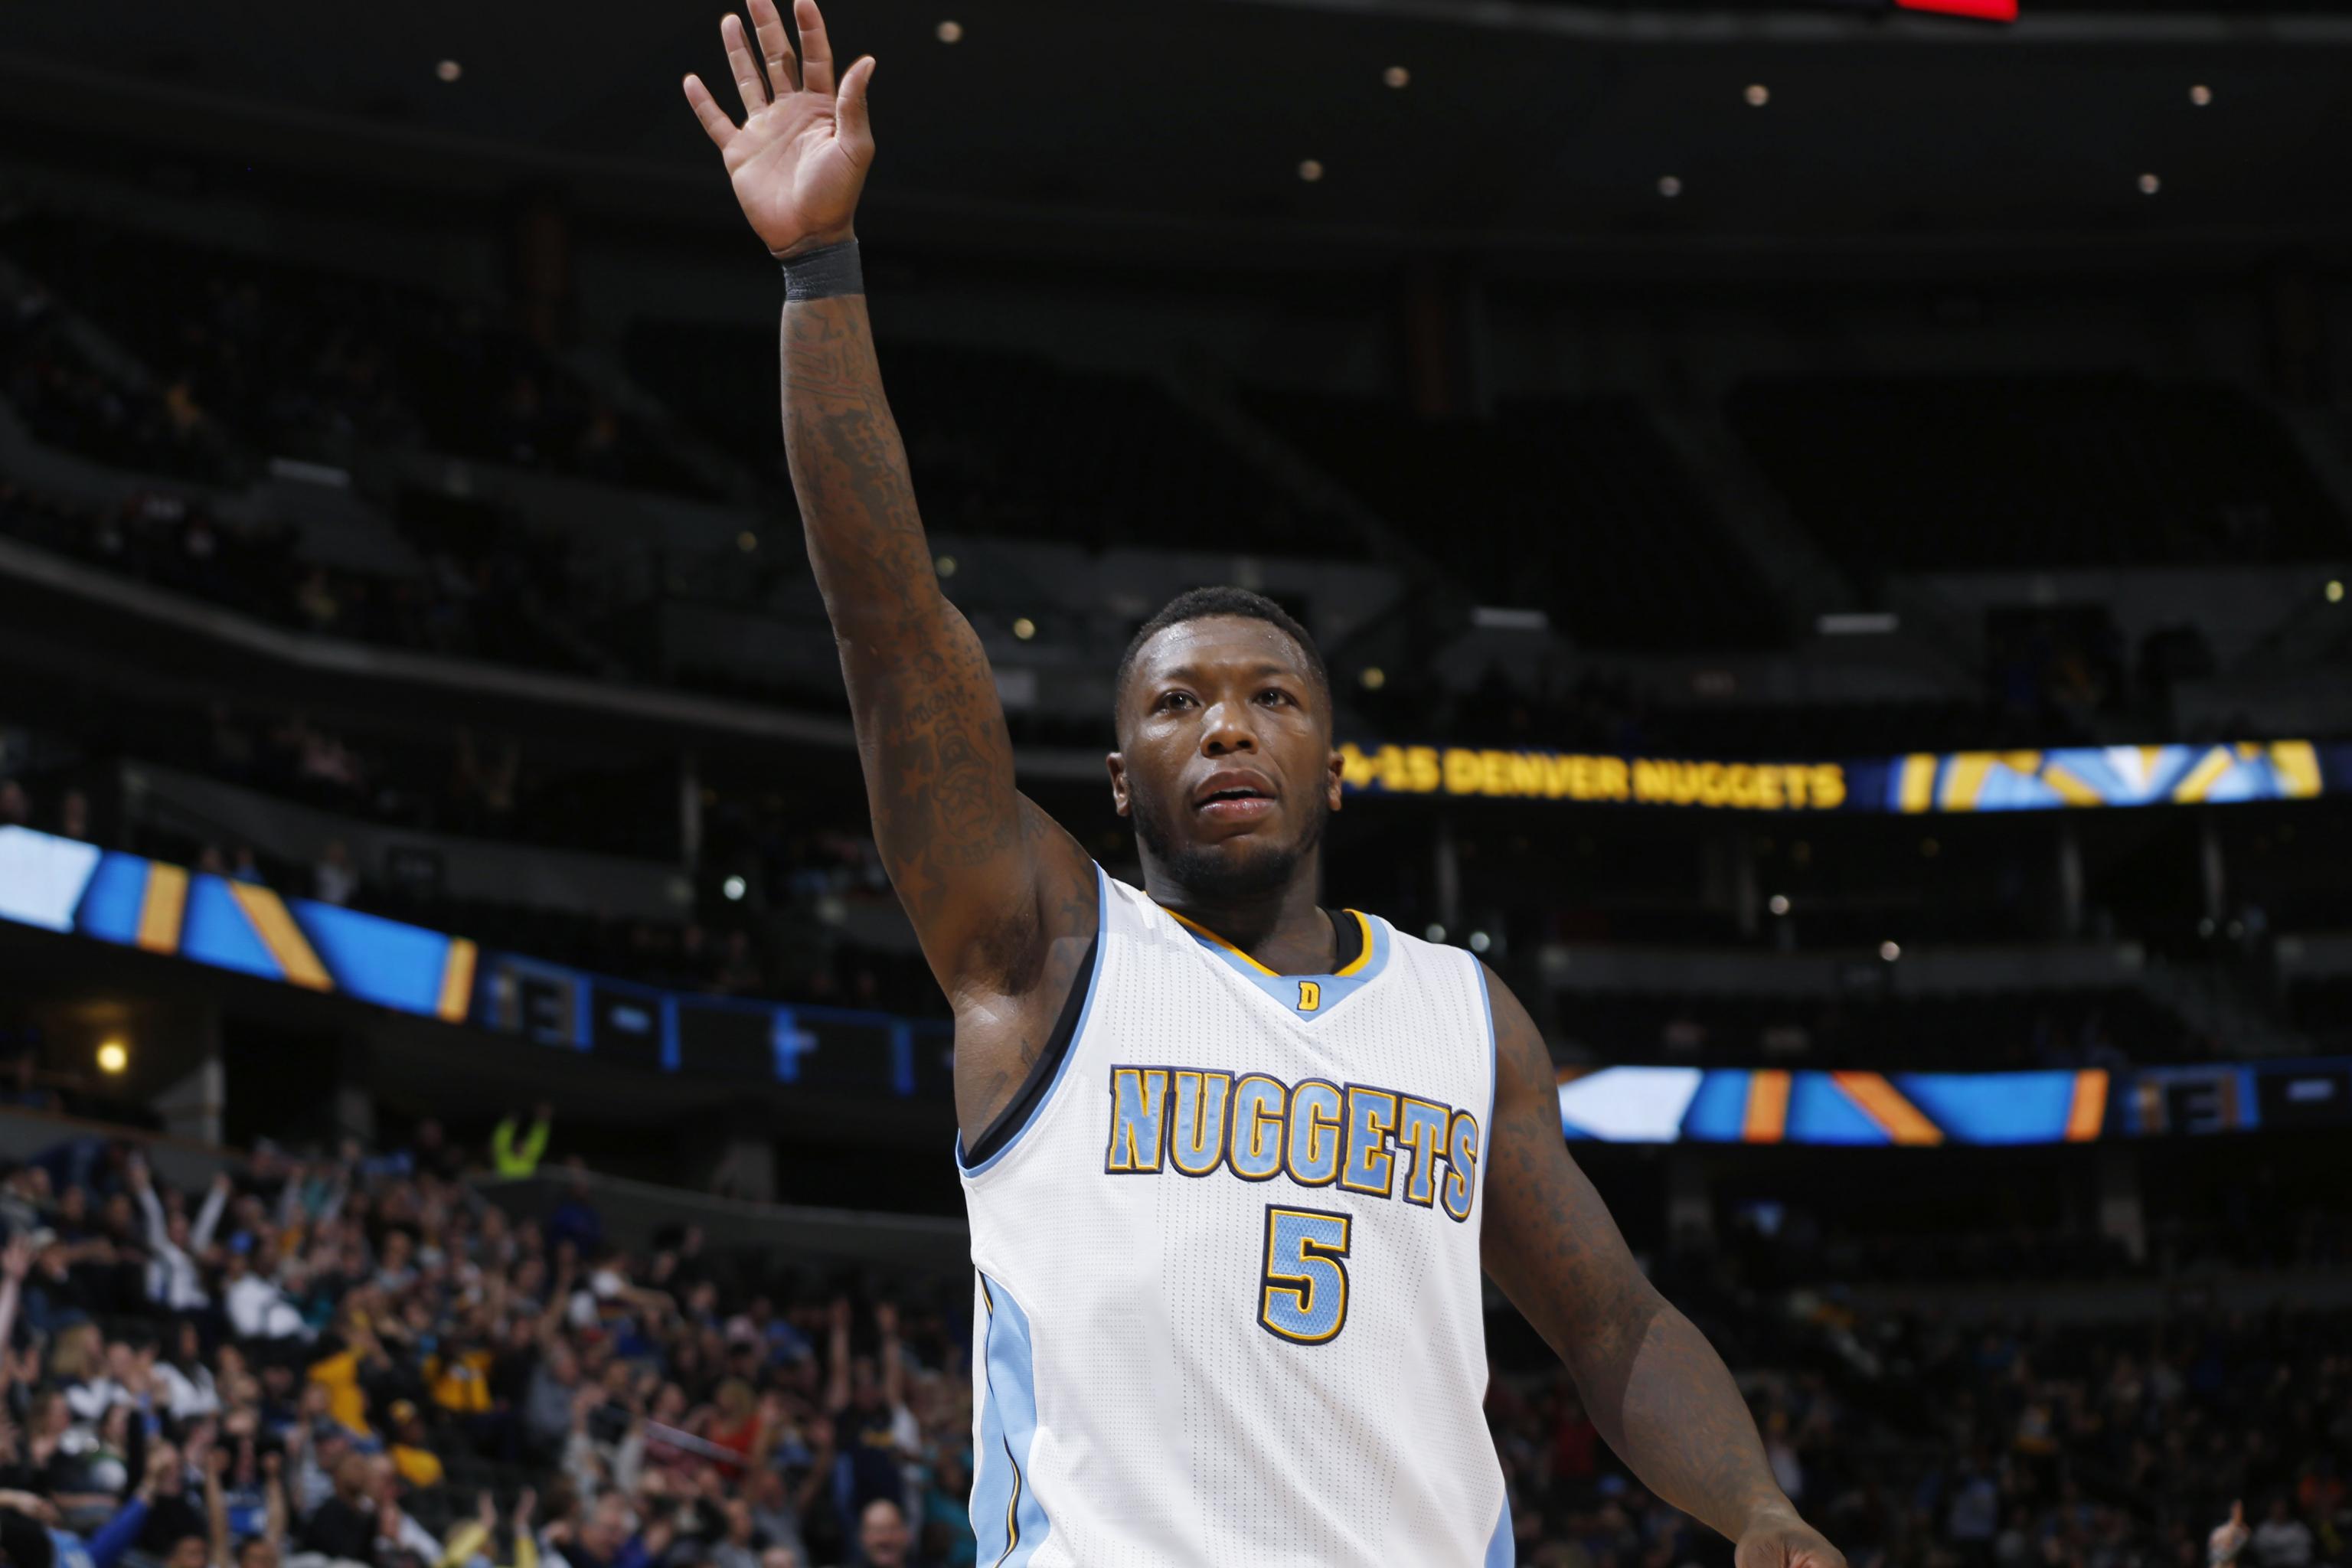 Former Nuggets guard Nate Robinson has tryout for Seattle Seahawks